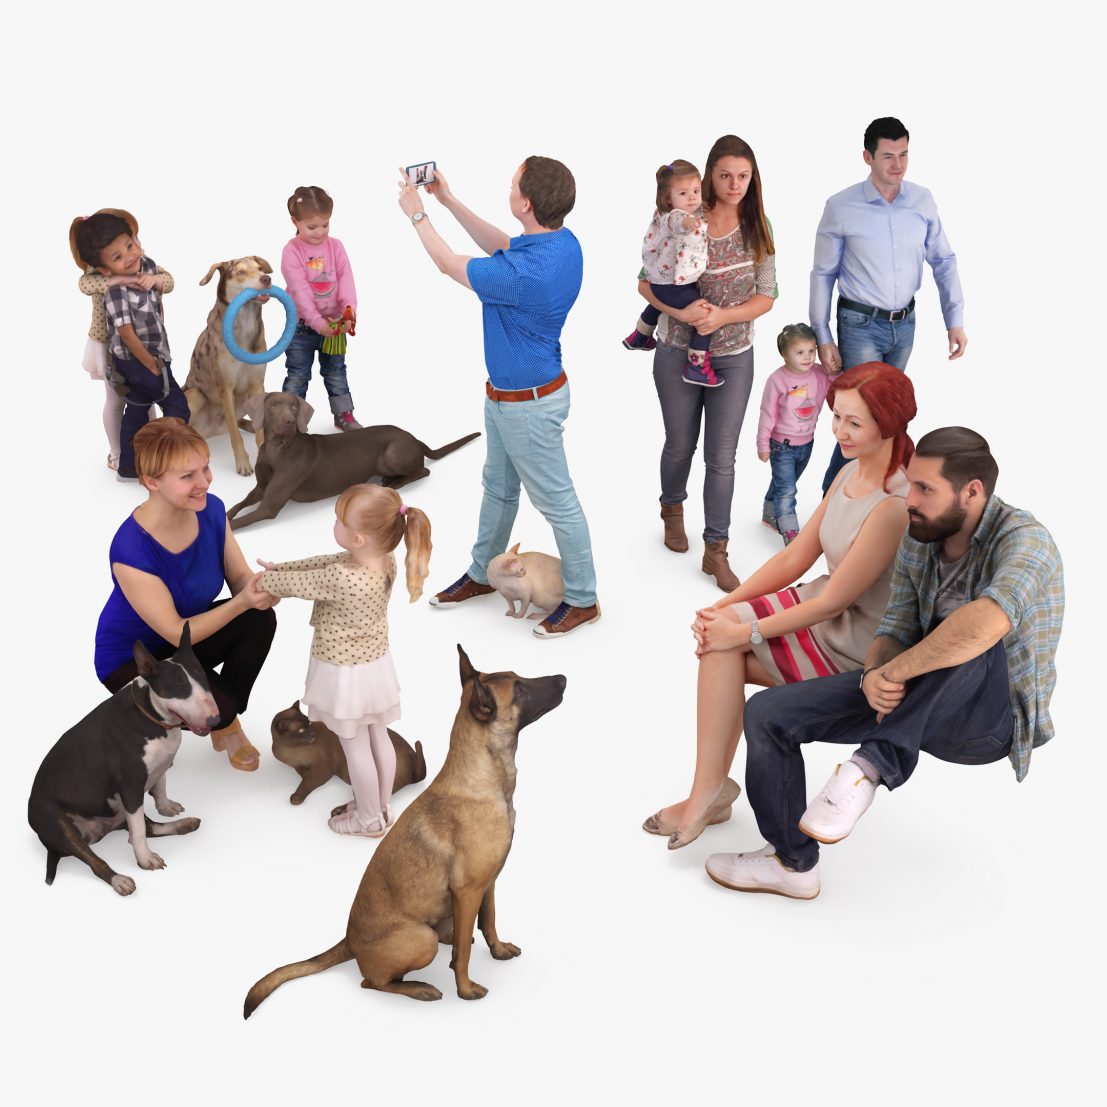 Pets and People Collection x14 3D Models | 3DTree Scanning Studio